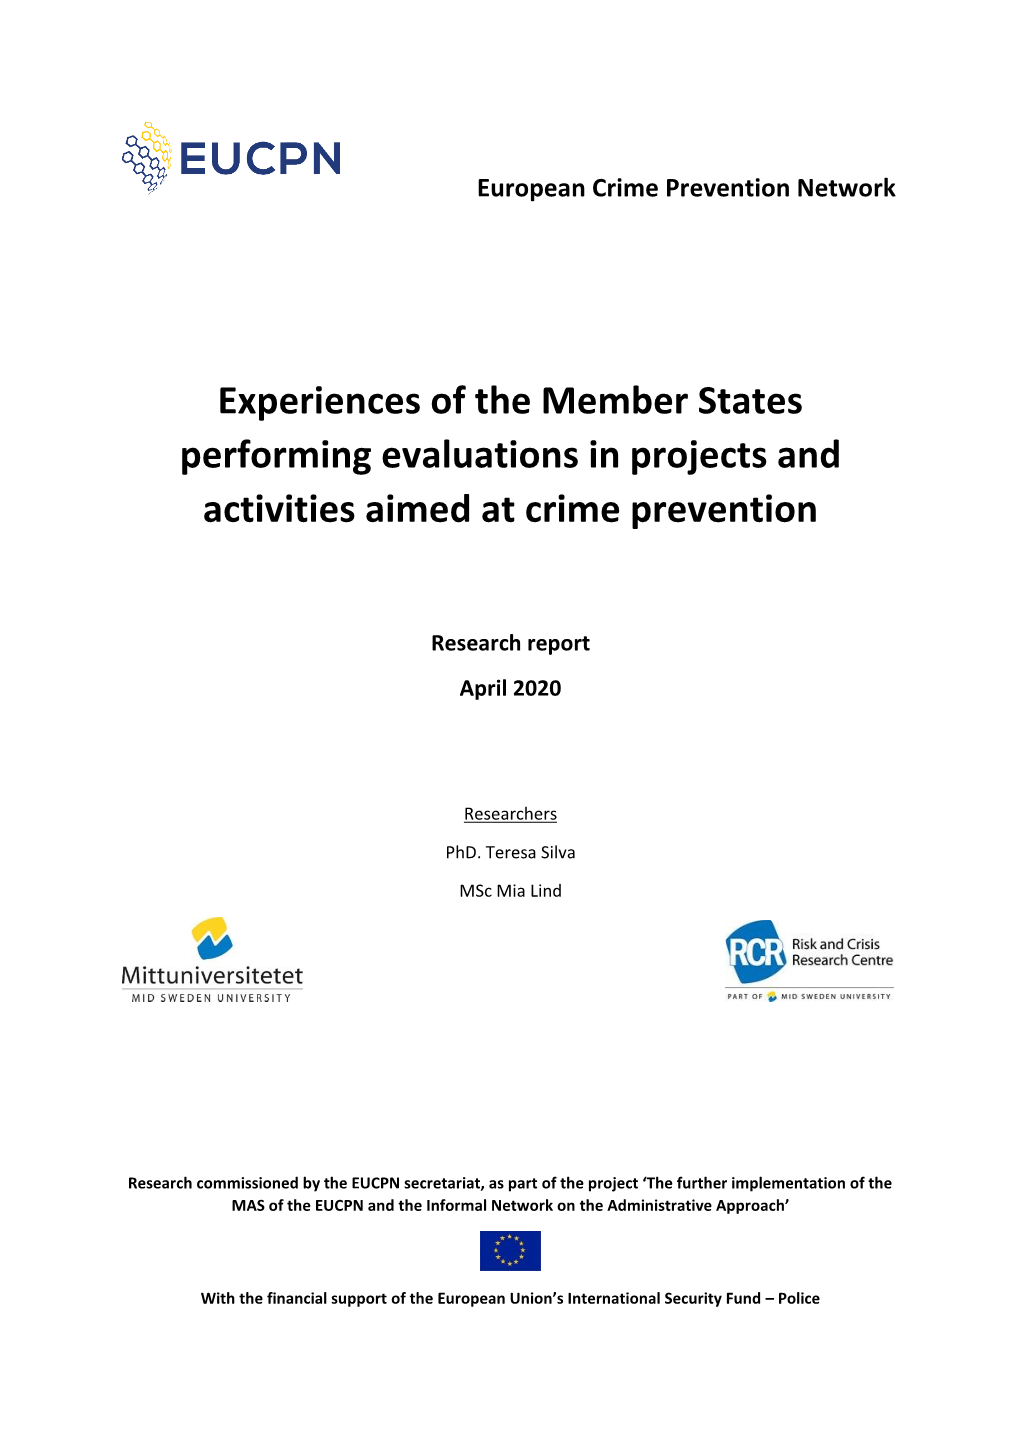 Experiences of the Member States Performing Evaluations in Projects and Activities Aimed at Crime Prevention